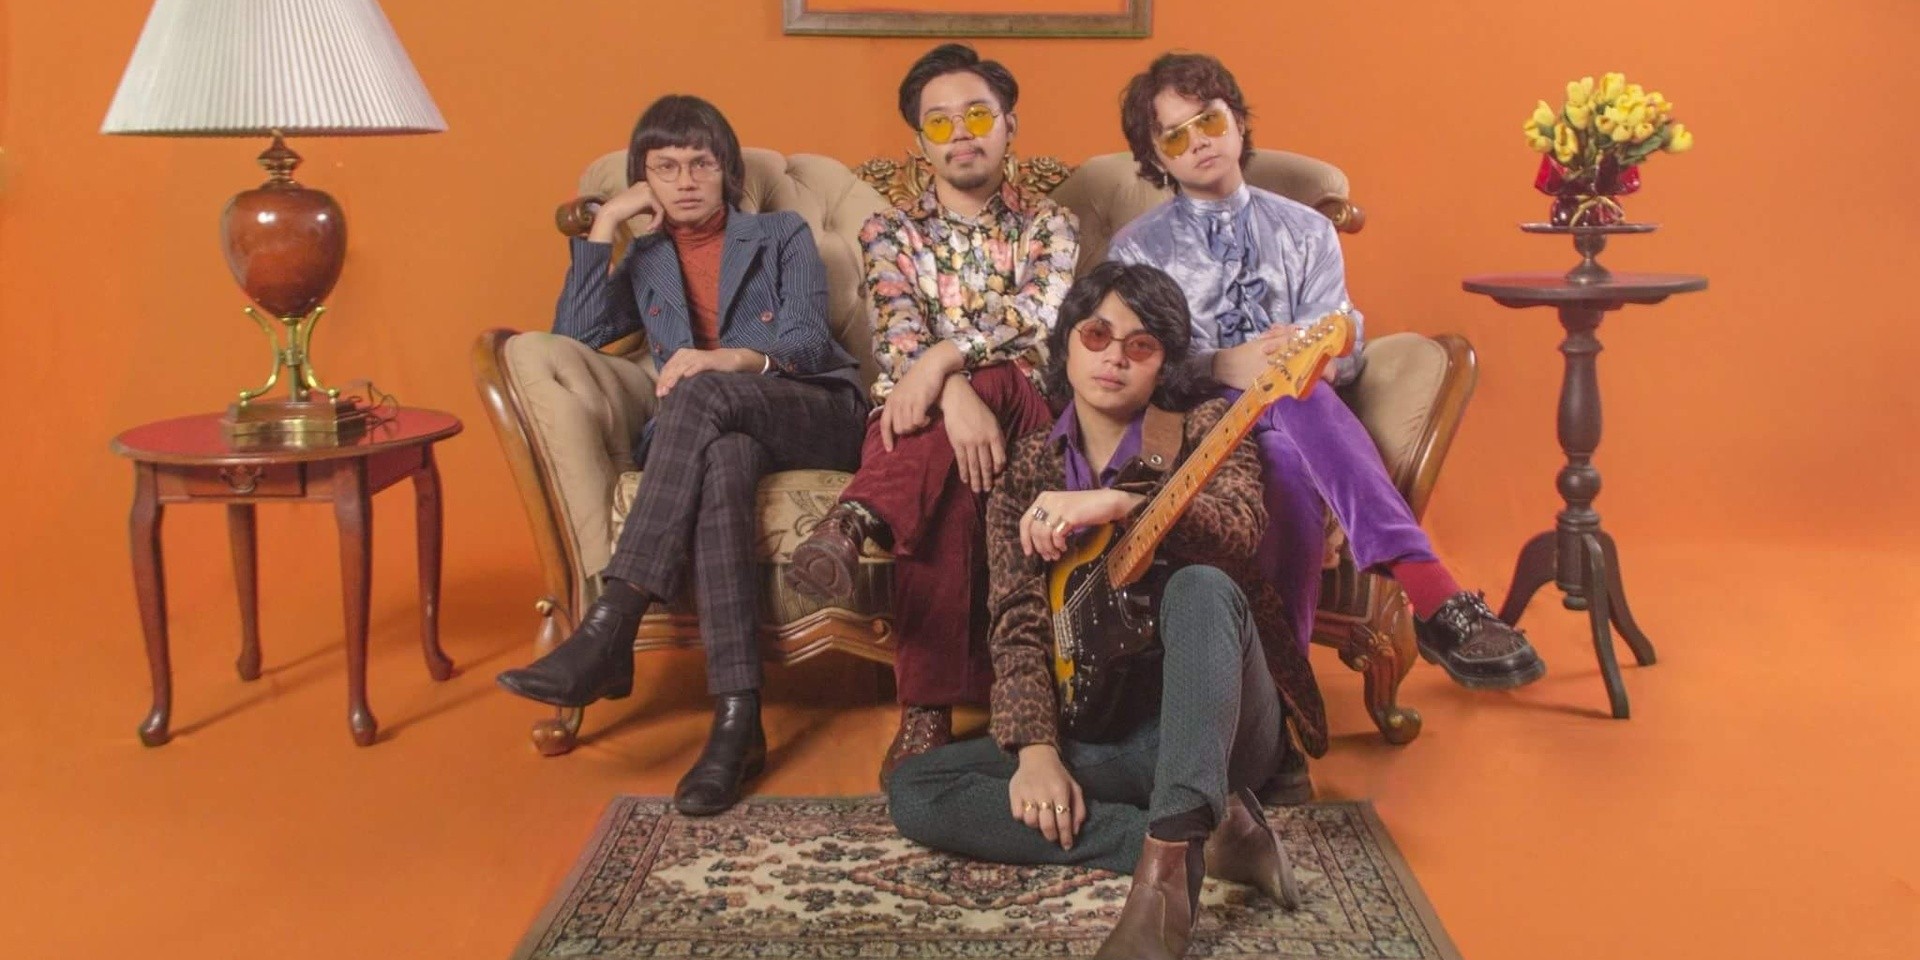 IV of Spades share the stage with David Foster on the latest episode of AirAsia RedTalks